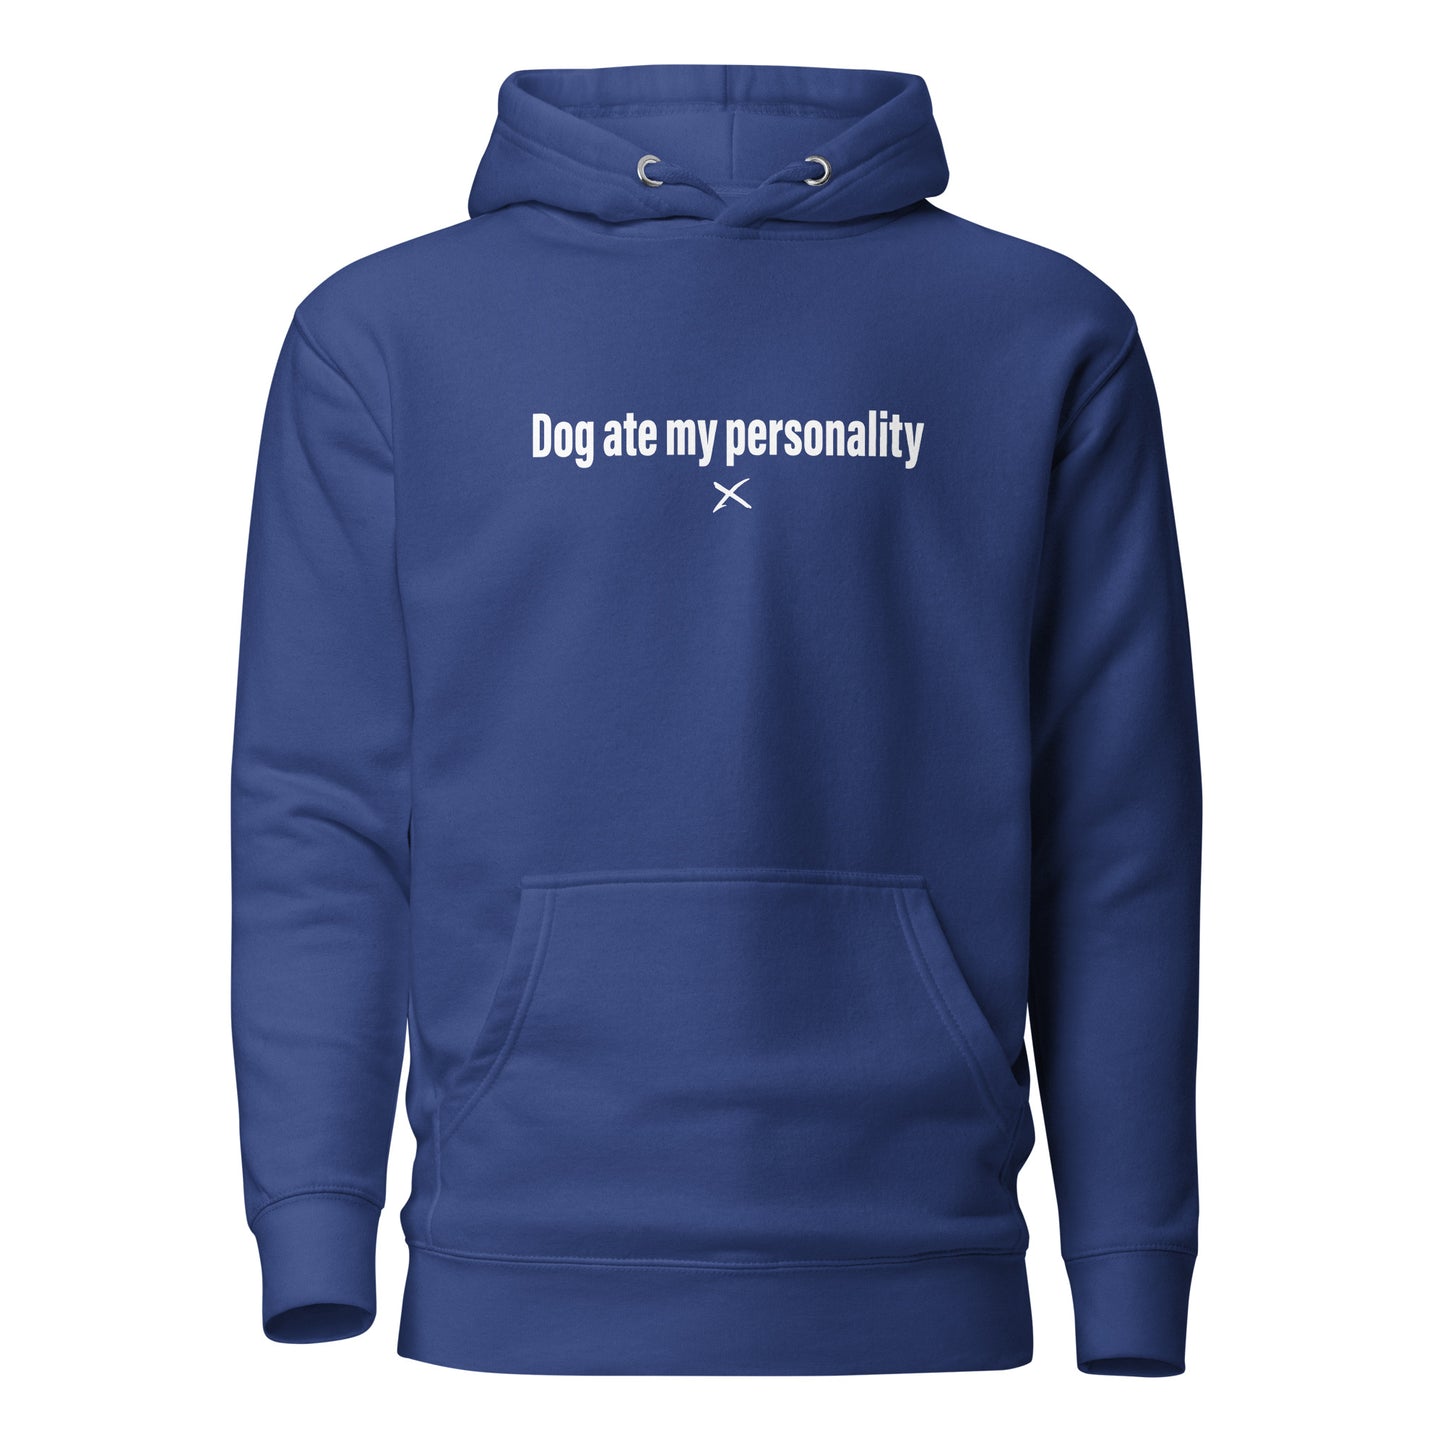 Dog ate my personality - Hoodie